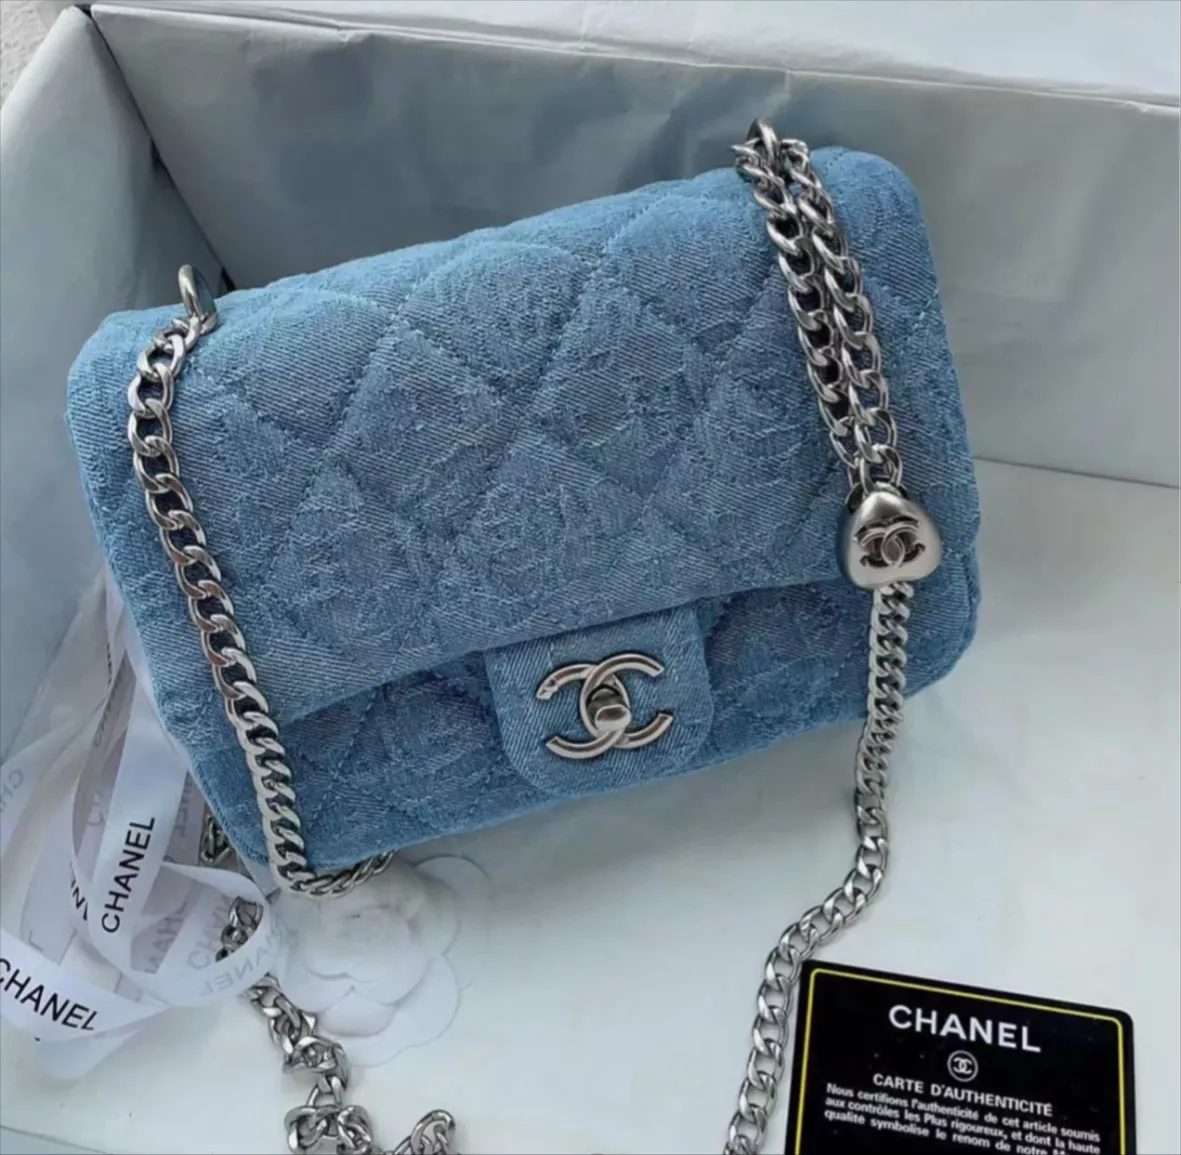 Are Dior Bag Dupes on DHGate worth it? - Best Selling Aliexpress Products  at your Fingertips